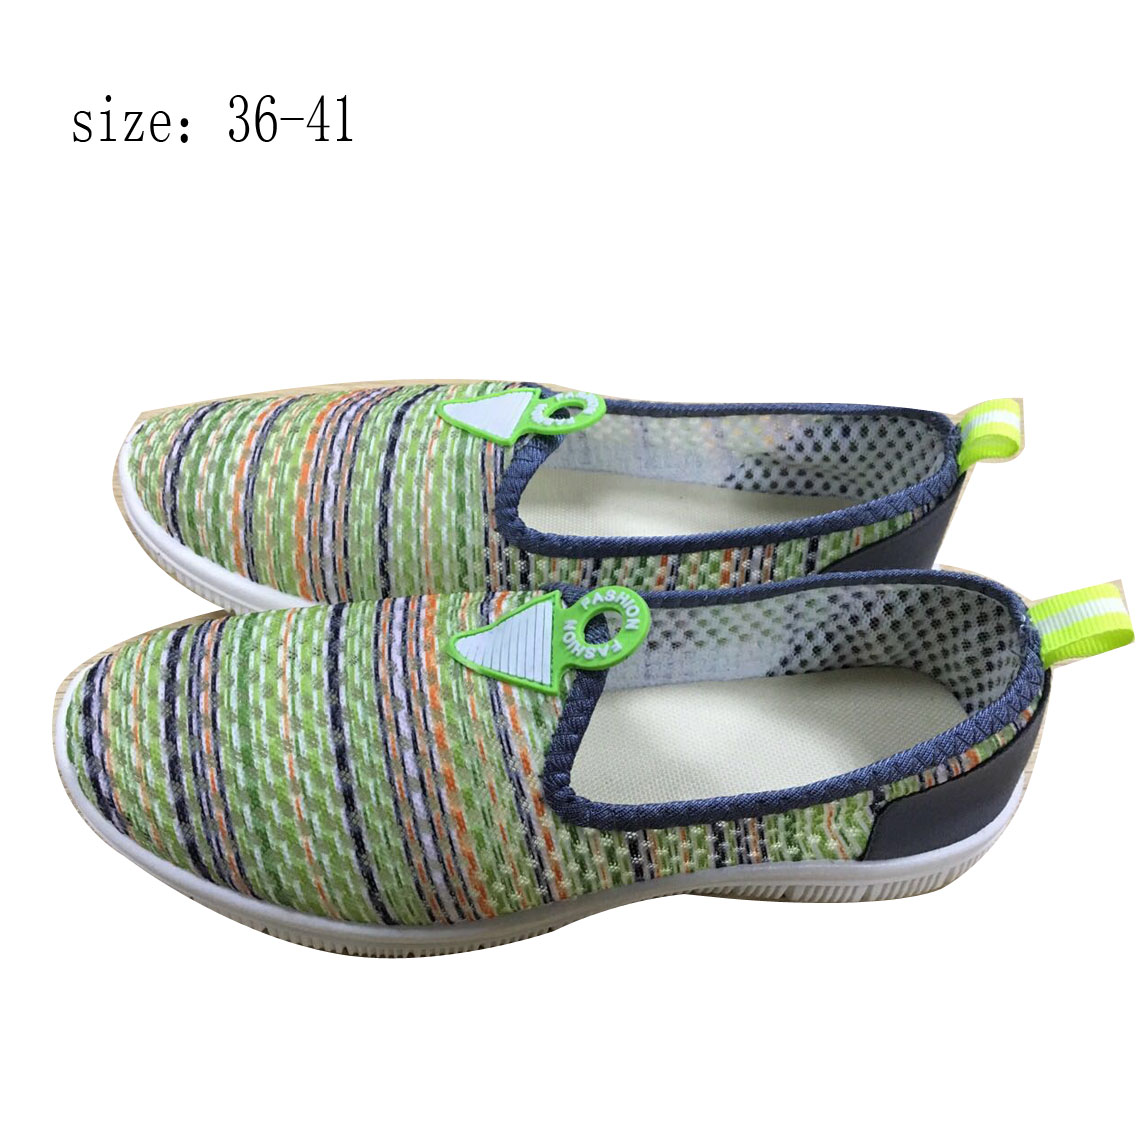 New design women casual shoes canvas shoes (HP1951719) 1. ITEM...